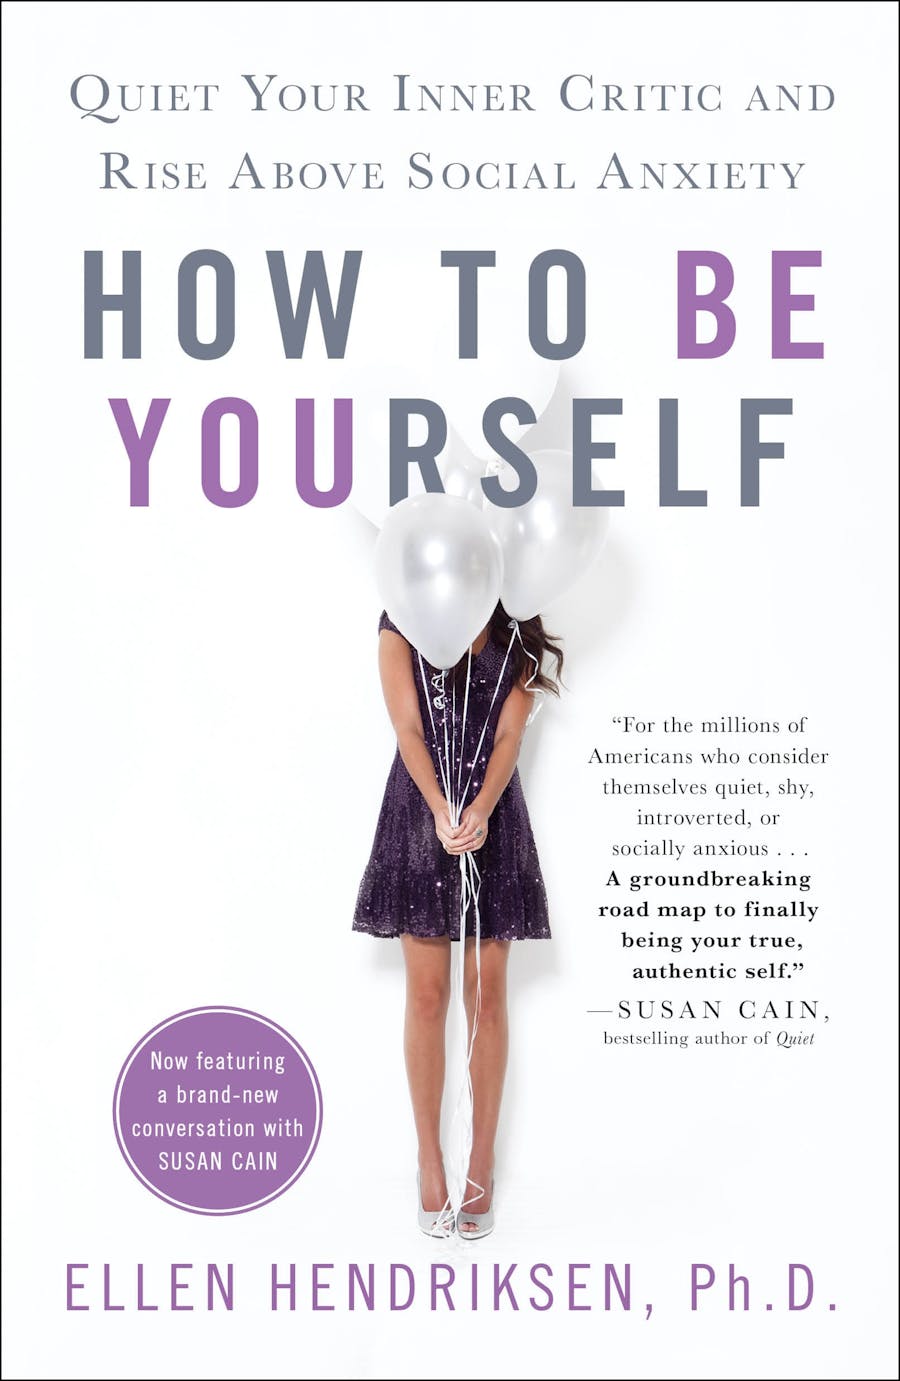 How to Be Yourself by Ellen Hendriksen, Ph.D.